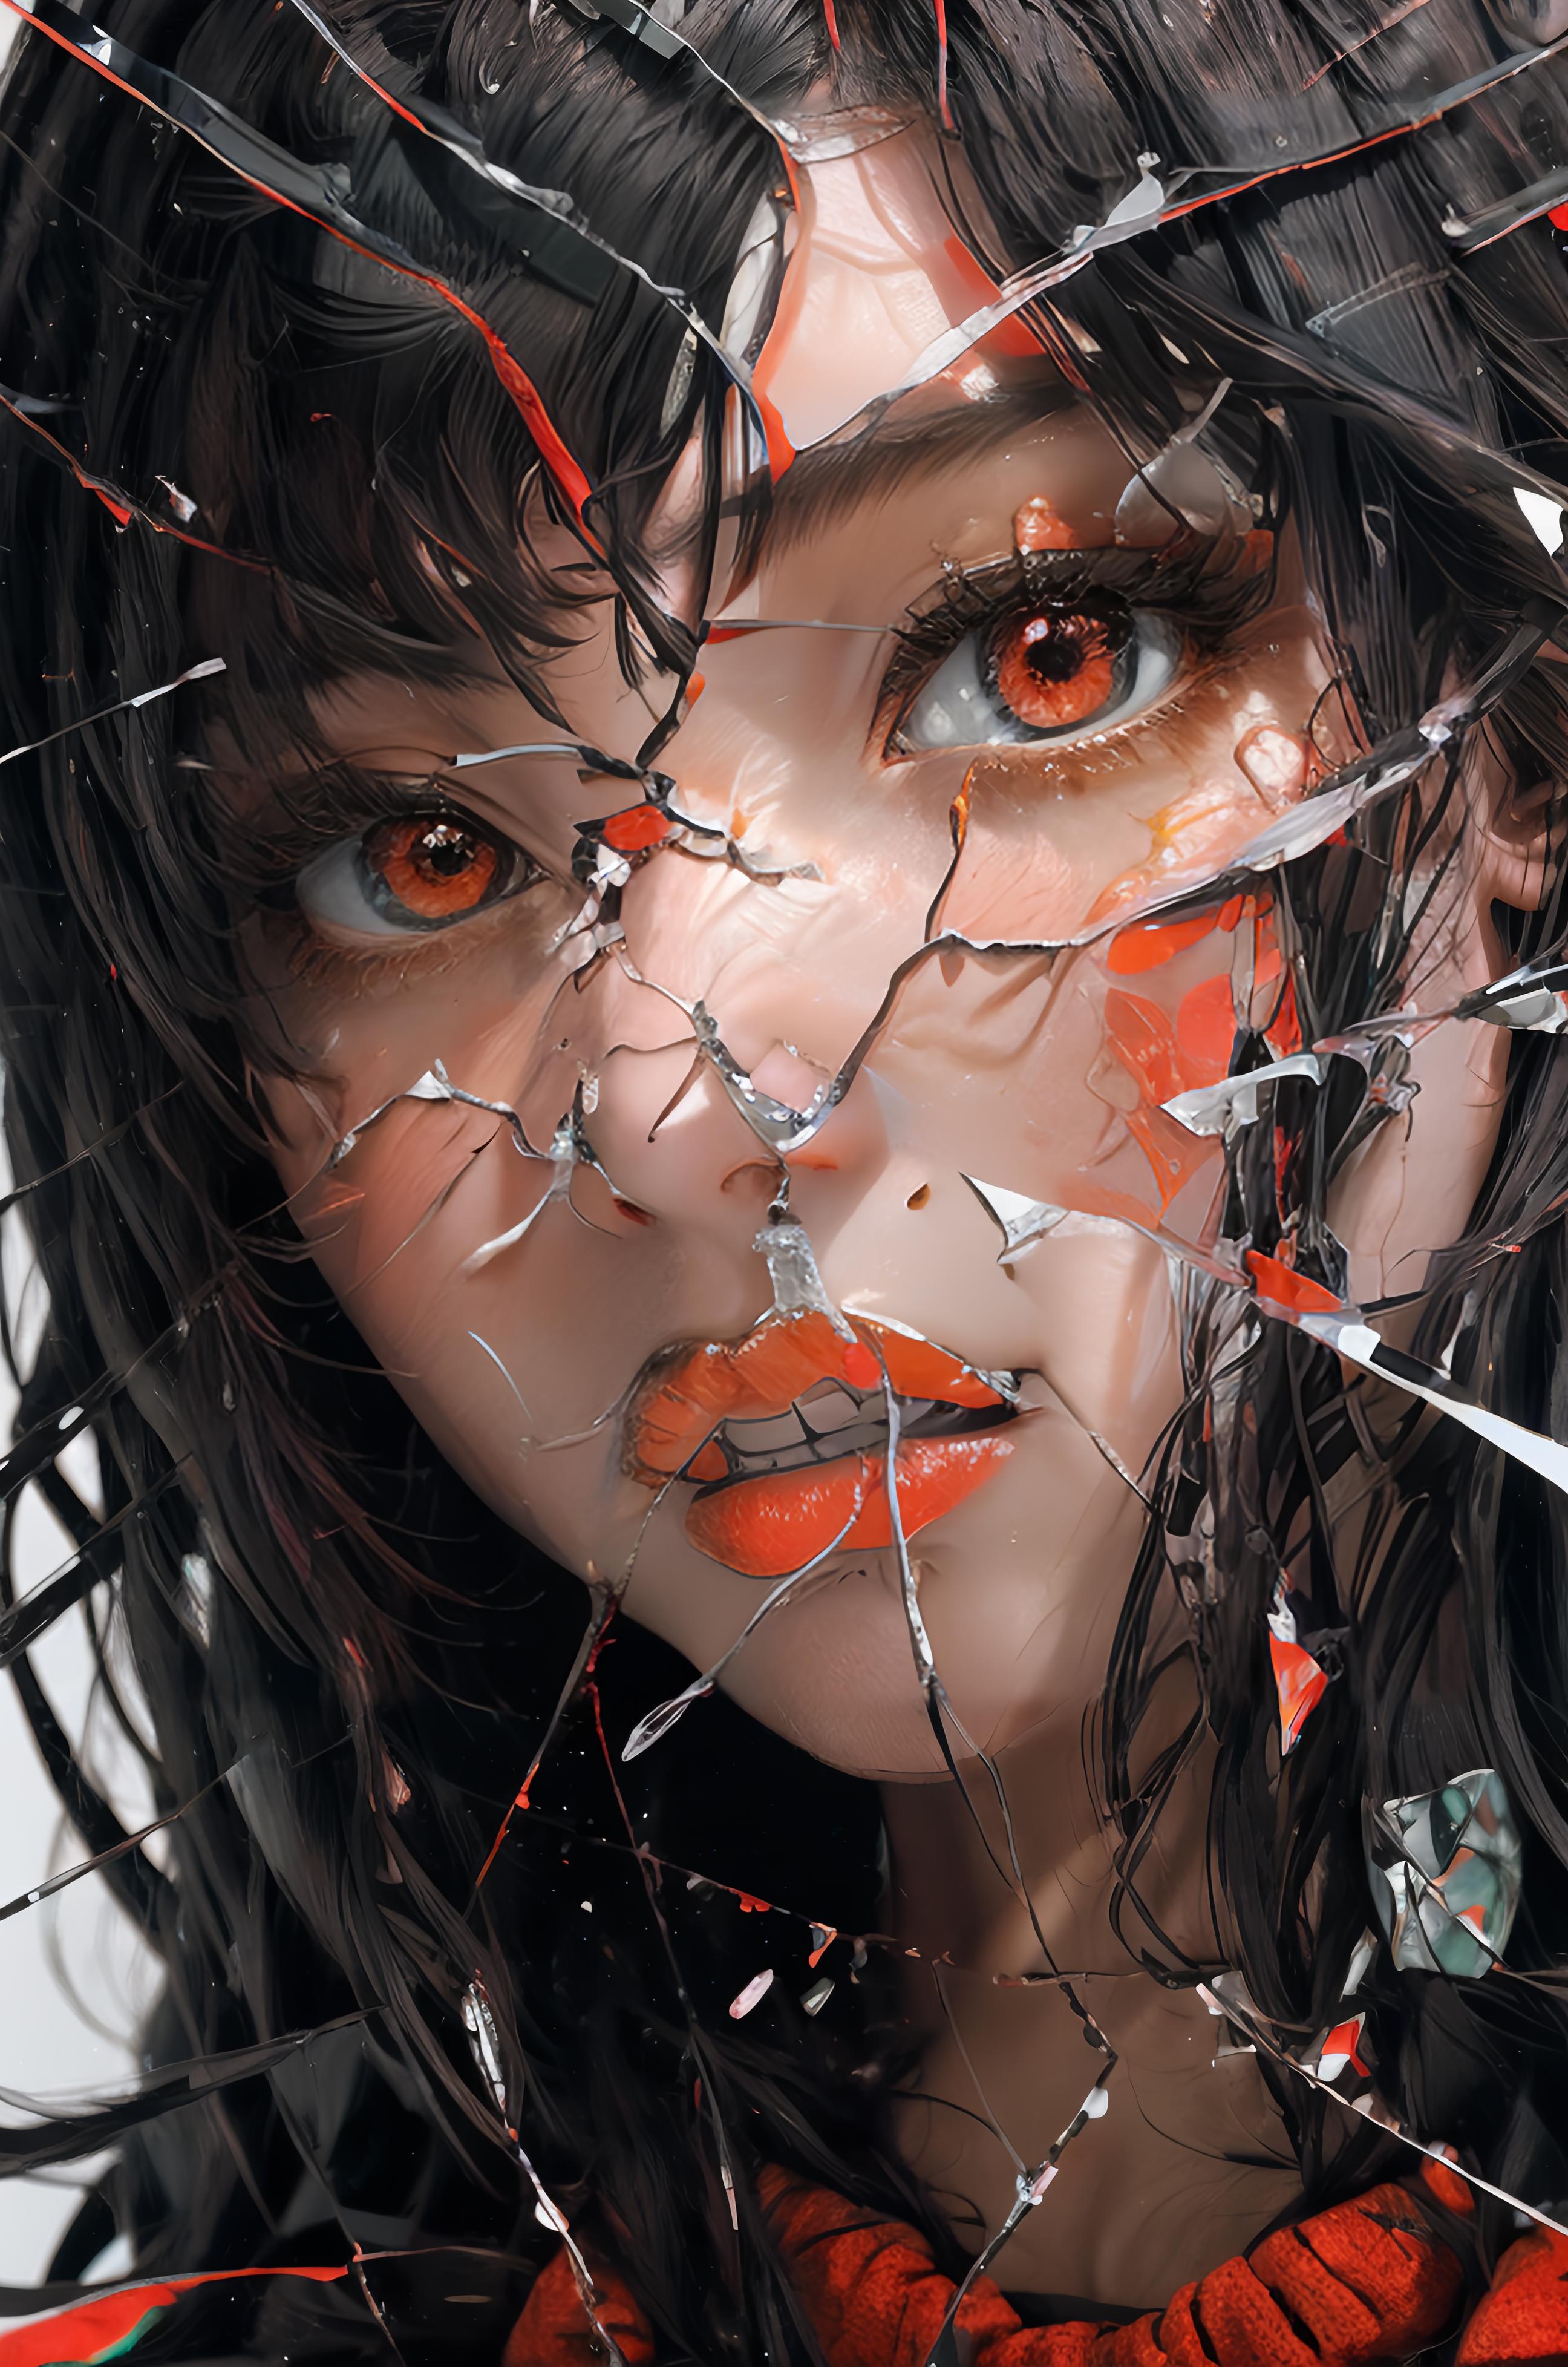 Artistic Image of a Woman with Red Eyes and Orange Lips, Surrounded by Shattered Glass.